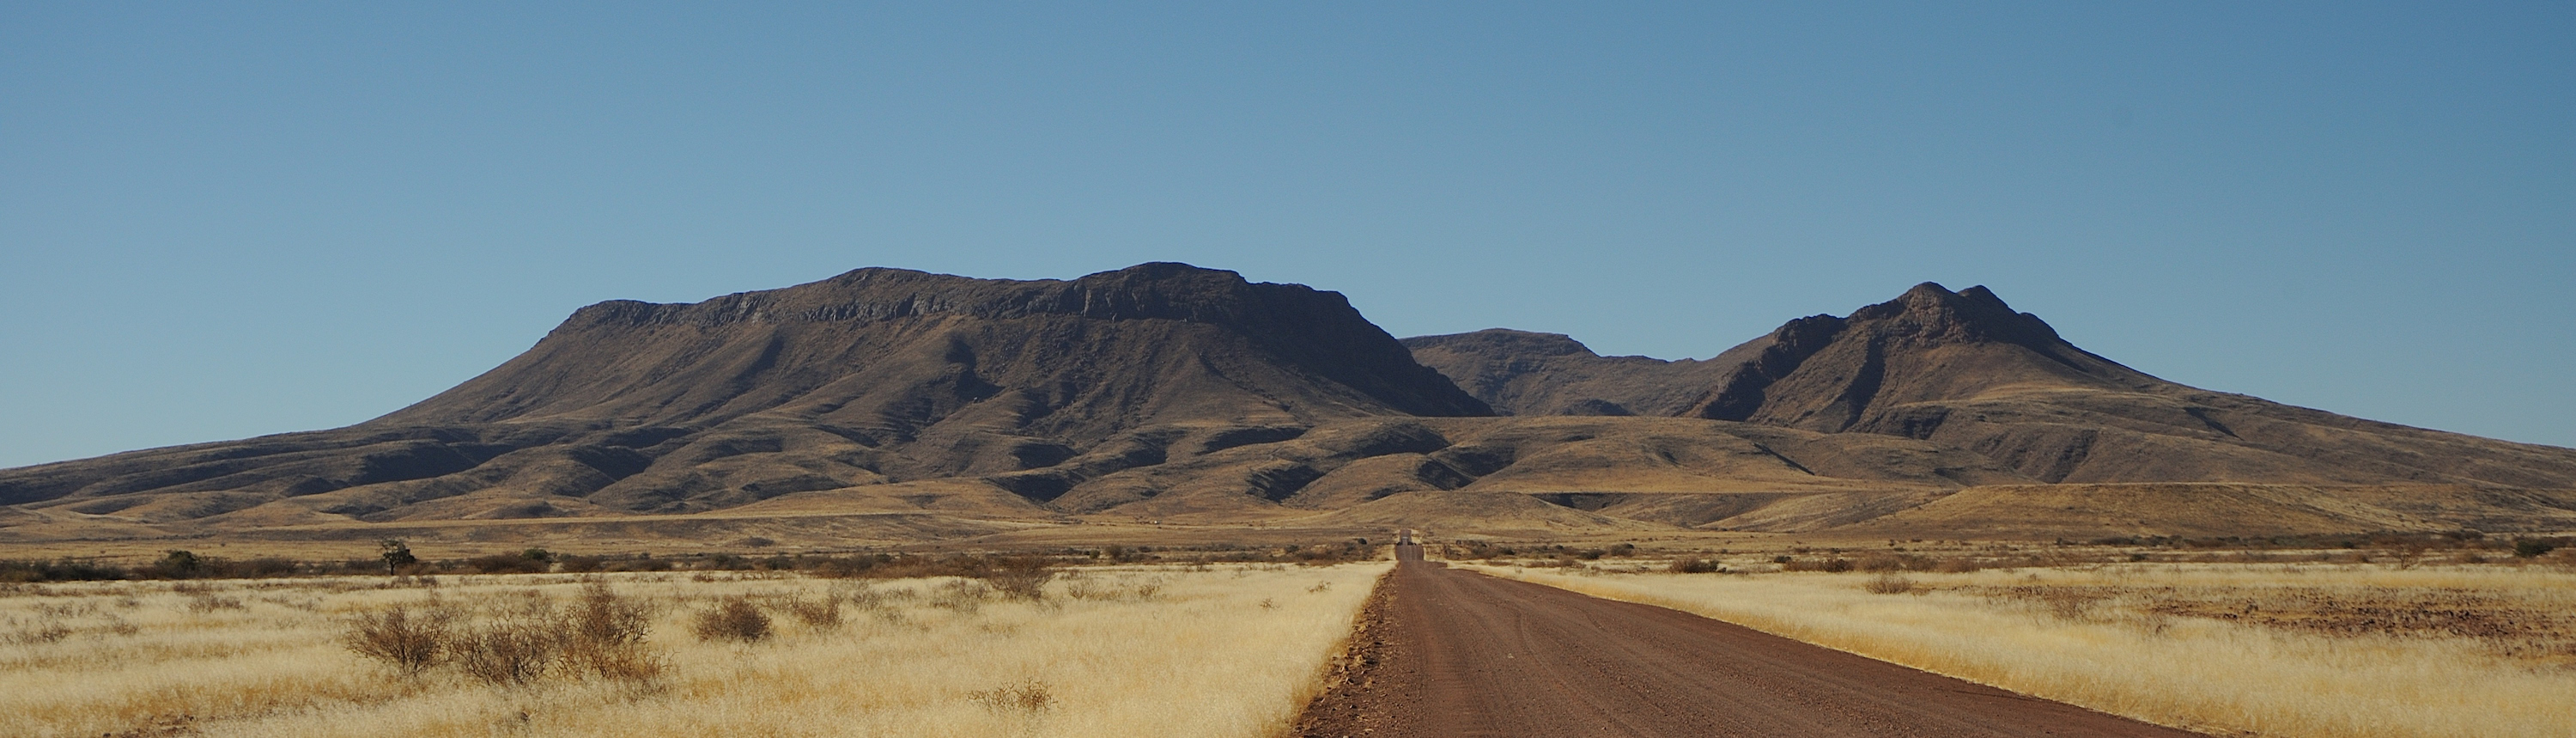 The rarely visited, but stunning Brukkaros mountain, in southern Namibia.